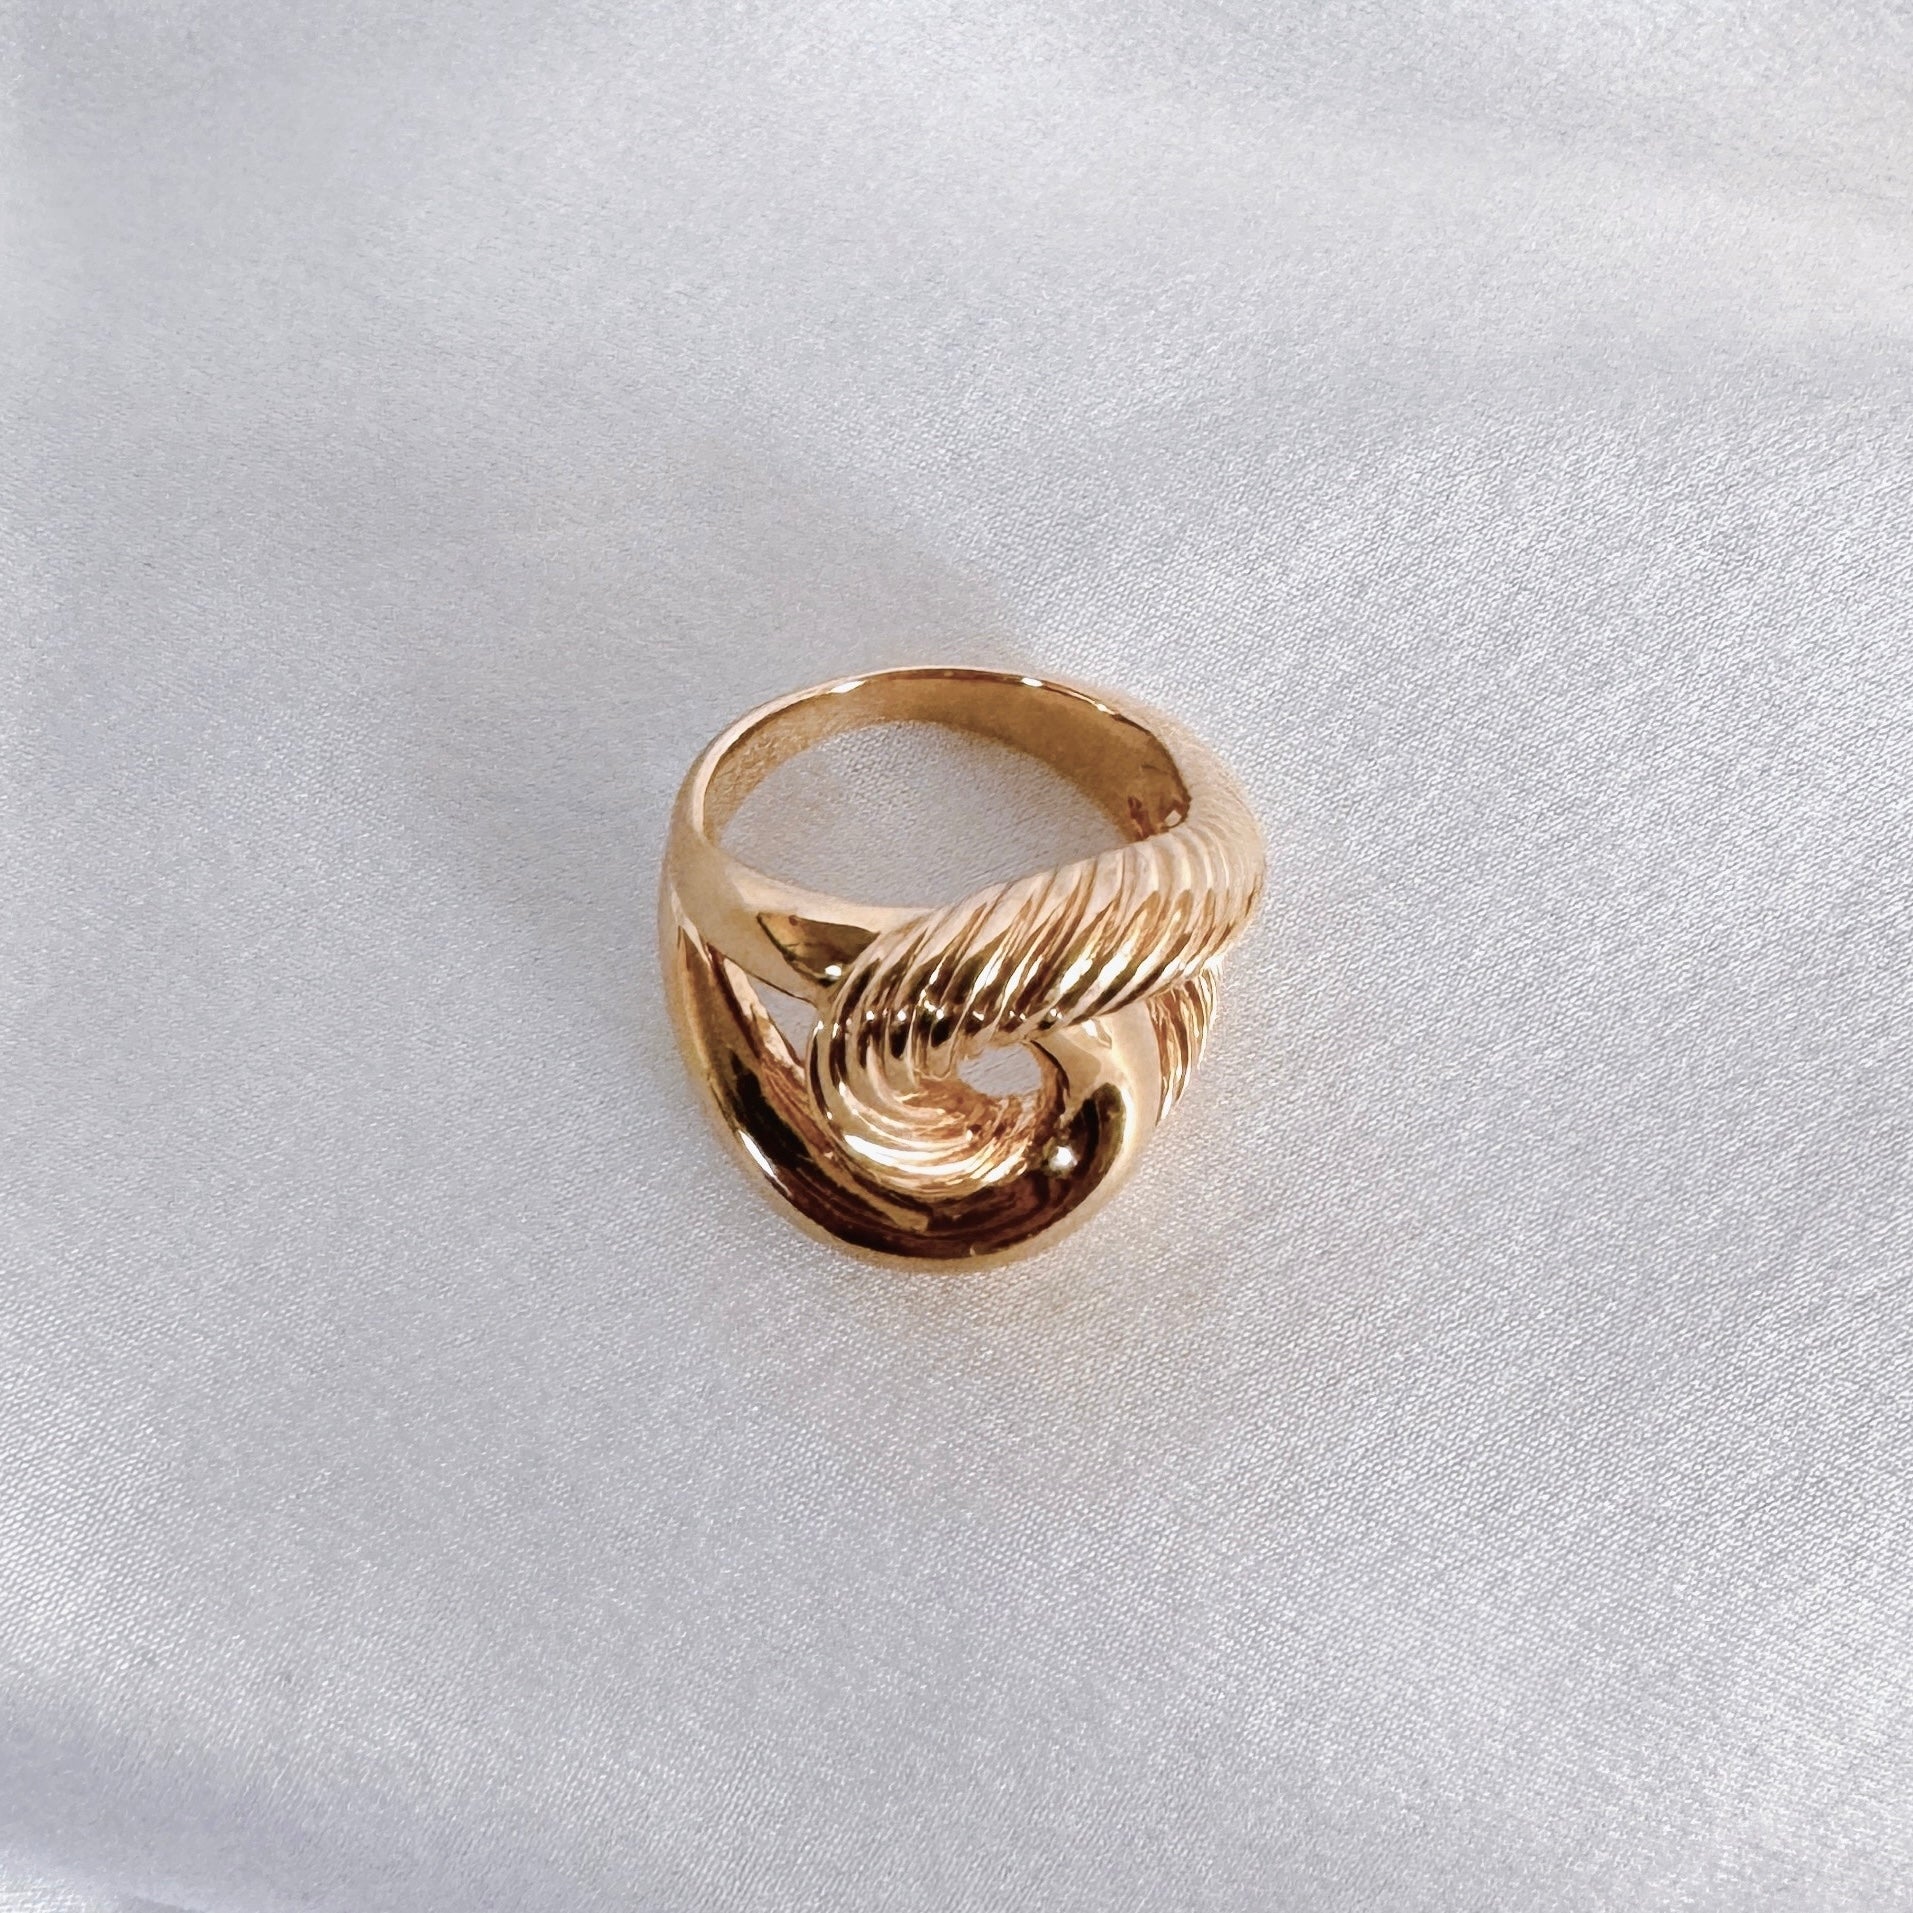 Gold-plated “Intertwined braided” ring